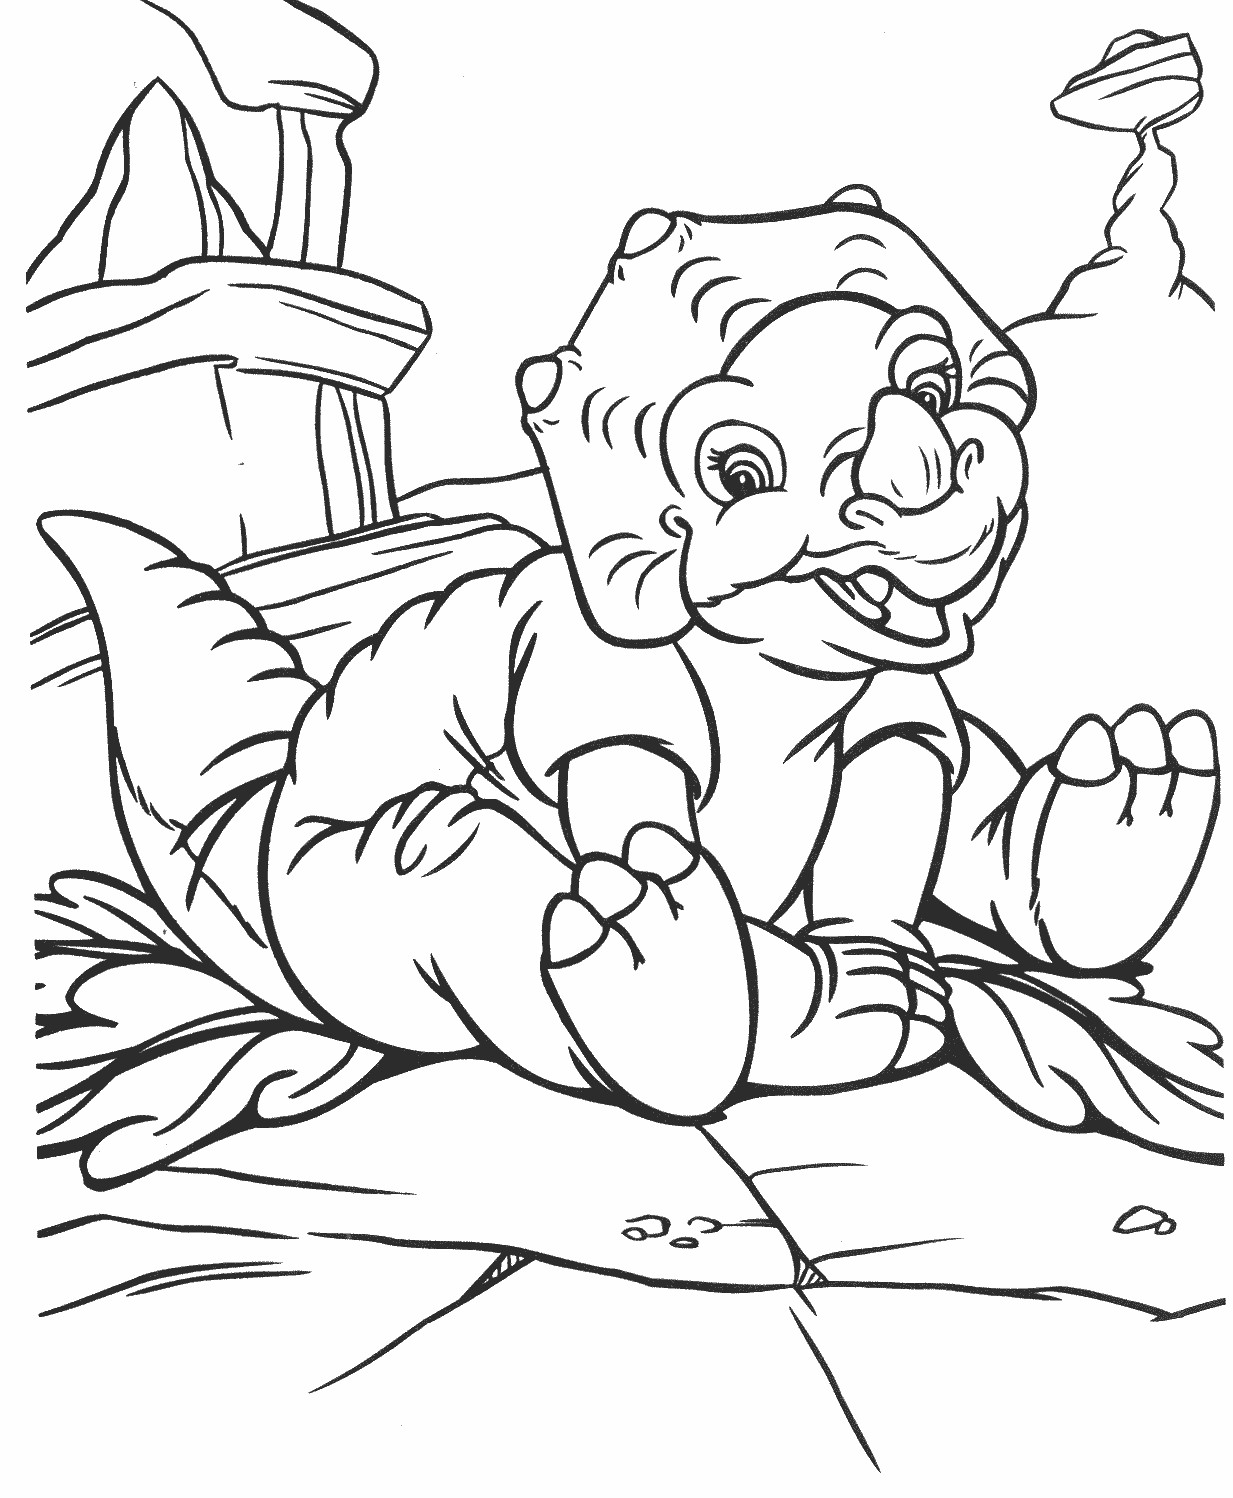 Coloring Pages For Kids Dinosaur
 dinosaur animals coloring pages dinosaur coloring pages